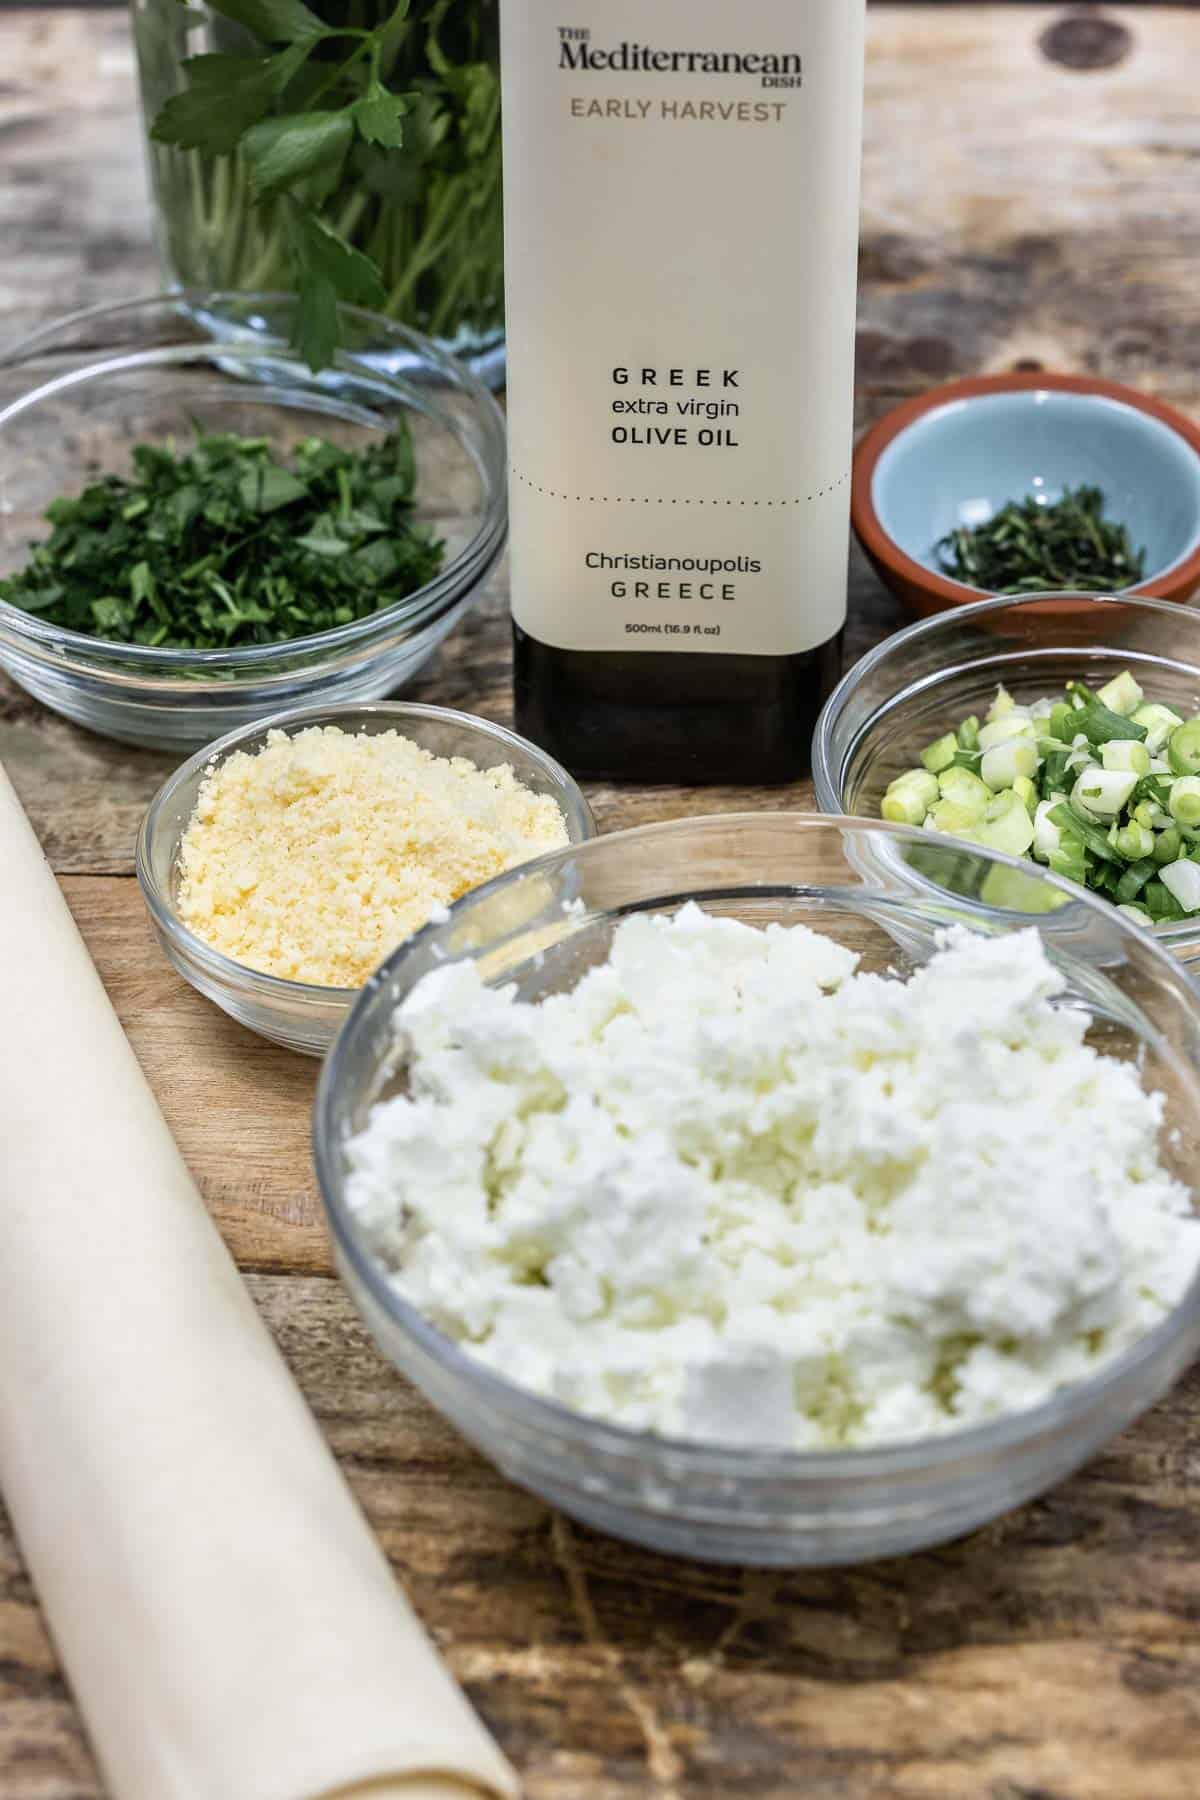 ingredients for sigara boregi including parsley, phyllo dough, parmesan cheese, feta cheese, scallions, thyme and olive oil.